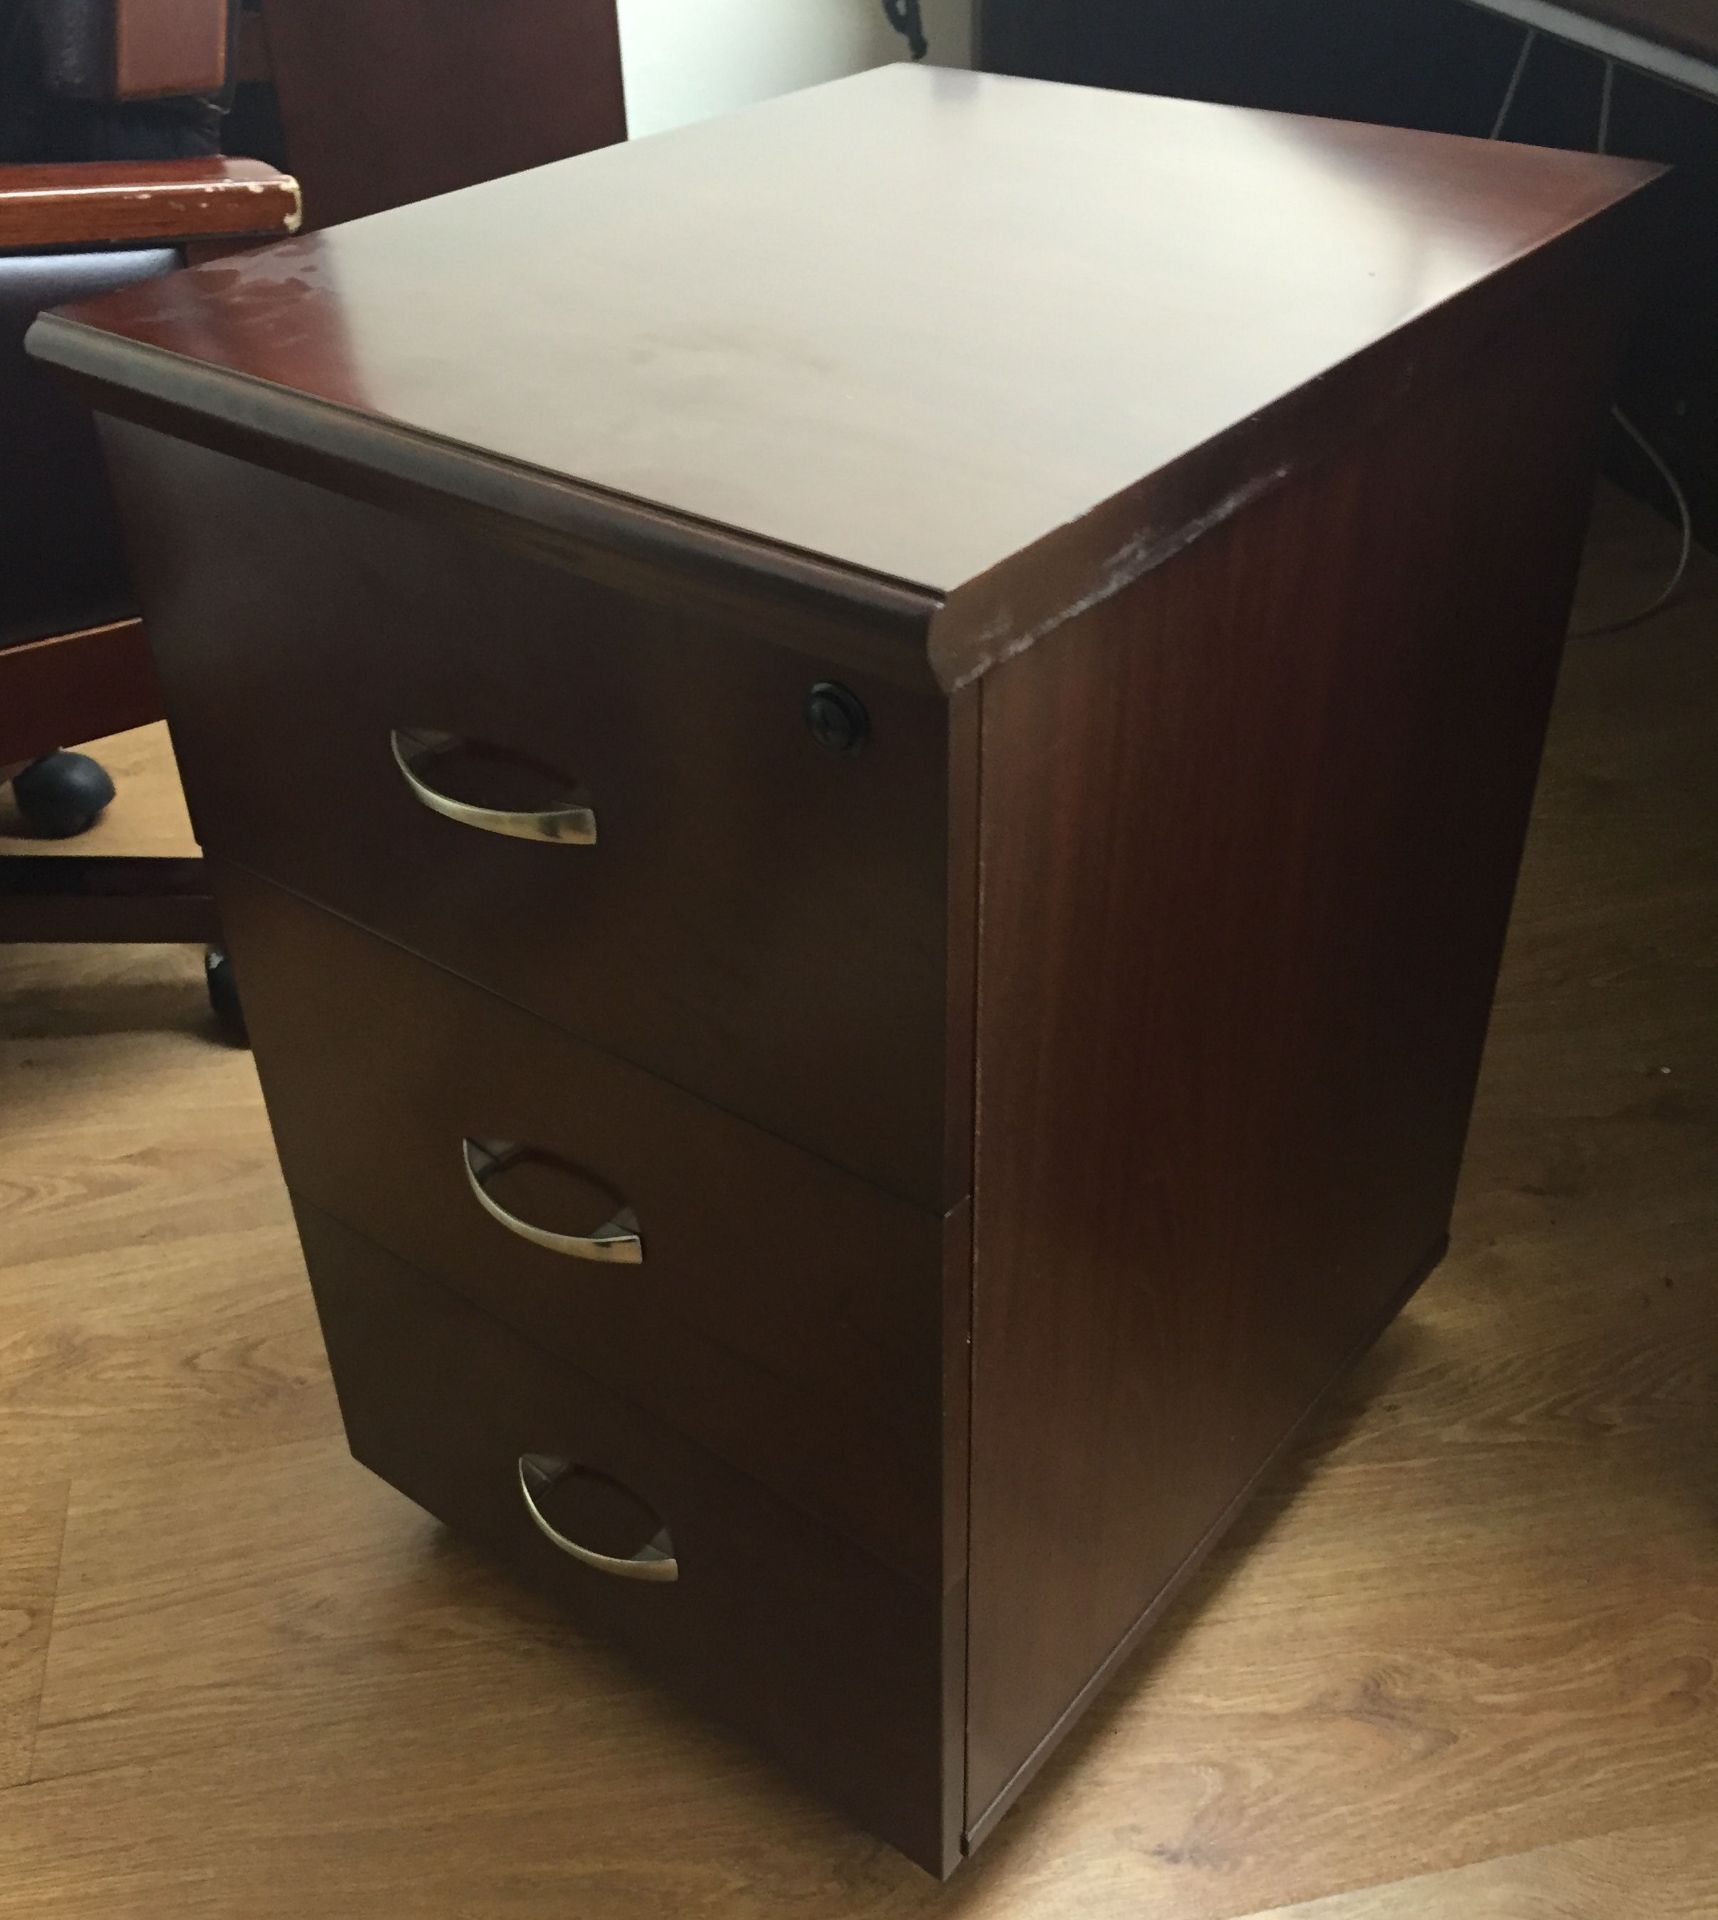 1 x Attractive Luxury Executive Office Desk, Executive Chair, Chest of Drawers and Sideboard - Image 6 of 21